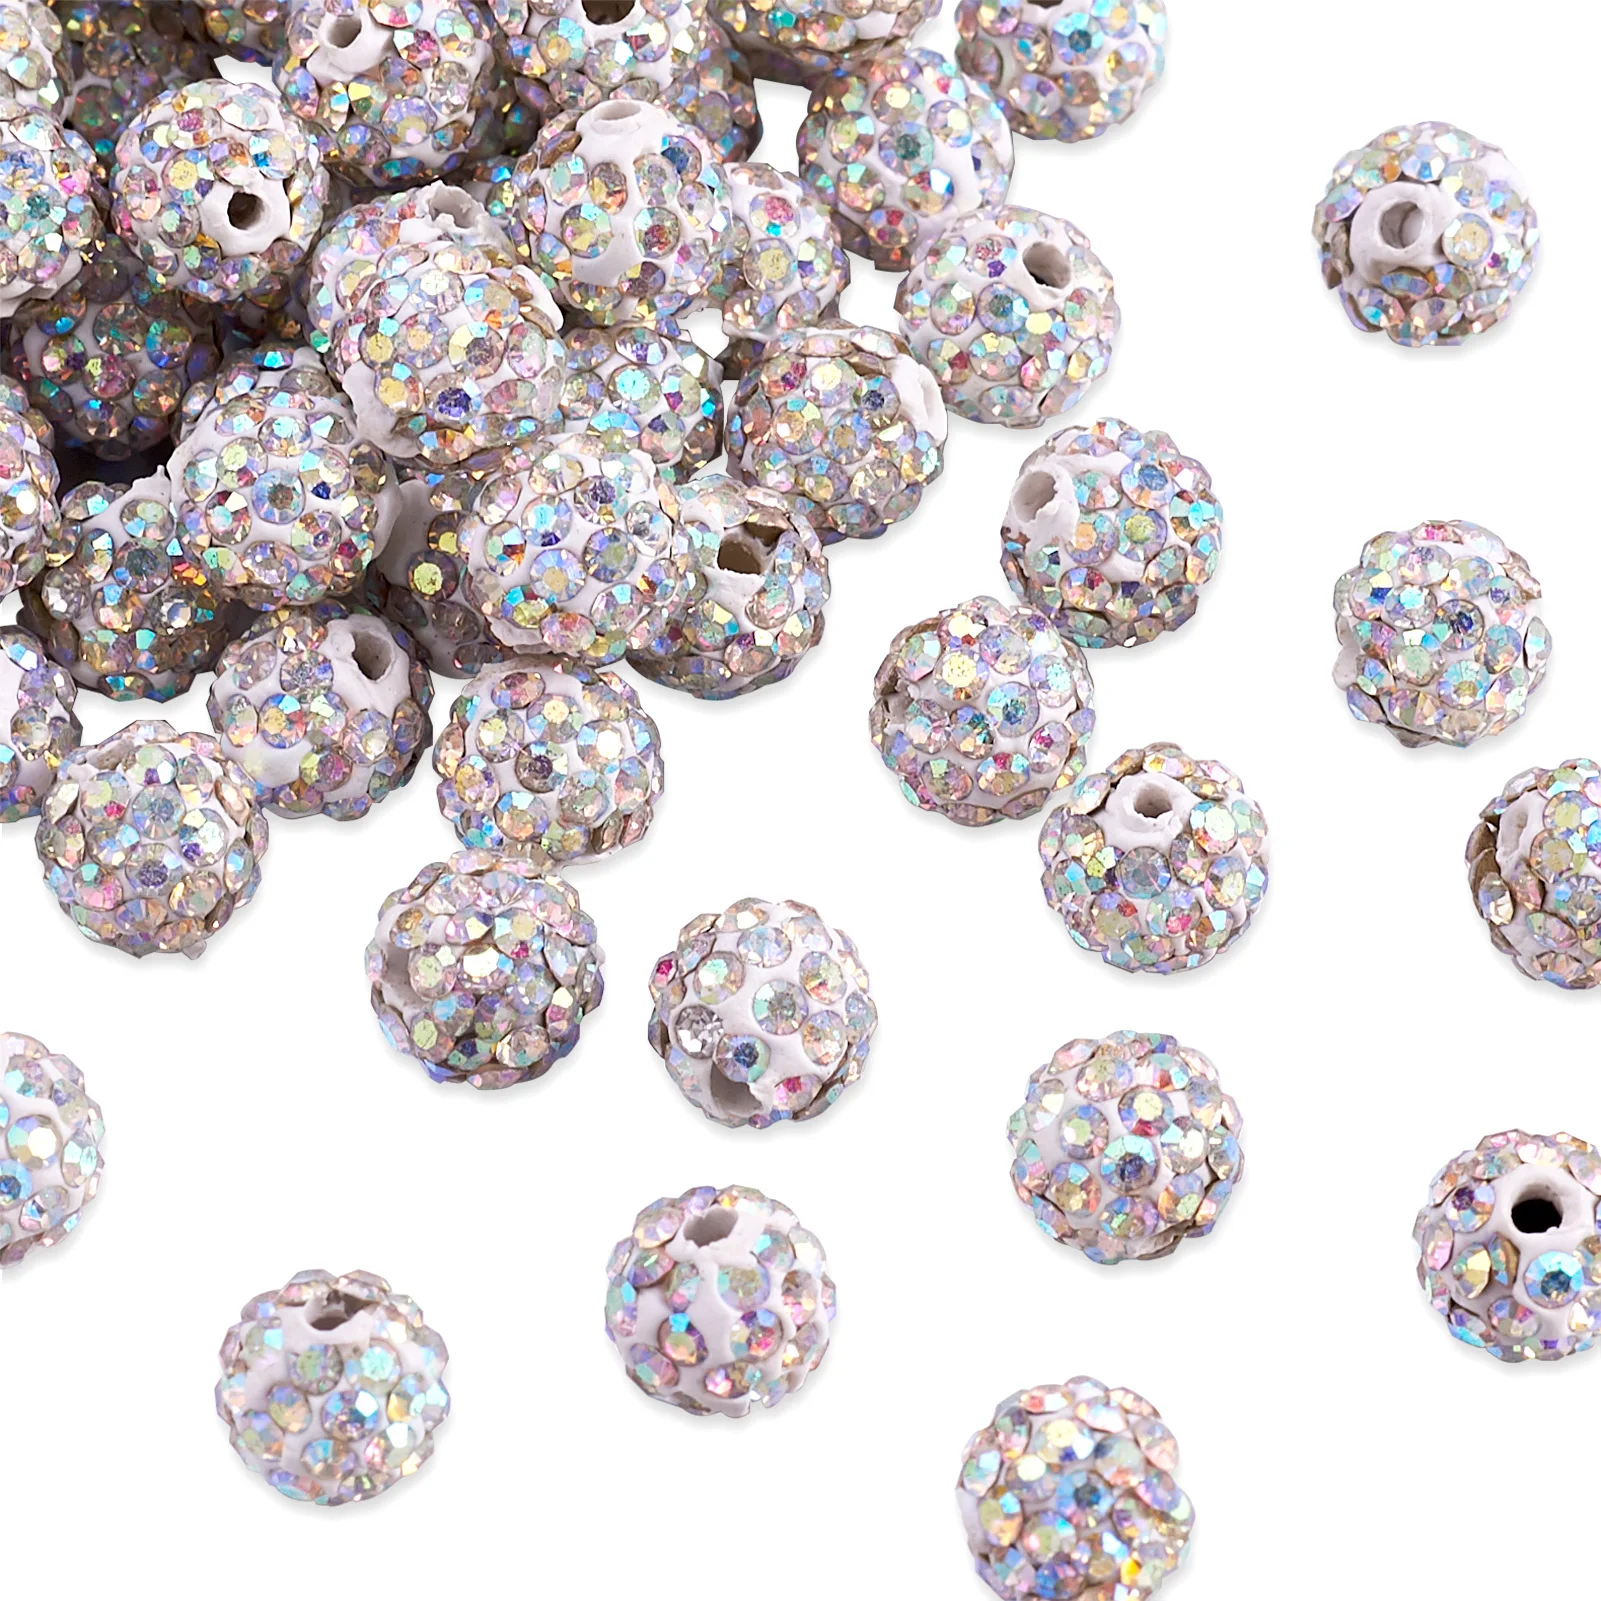 

100Pcs 8mm Rhinestone Pave Disco Ball Beads Polymer Clay Crystal Loose Spacer Beads For DIY Bracelet Necklace Jewelry Making